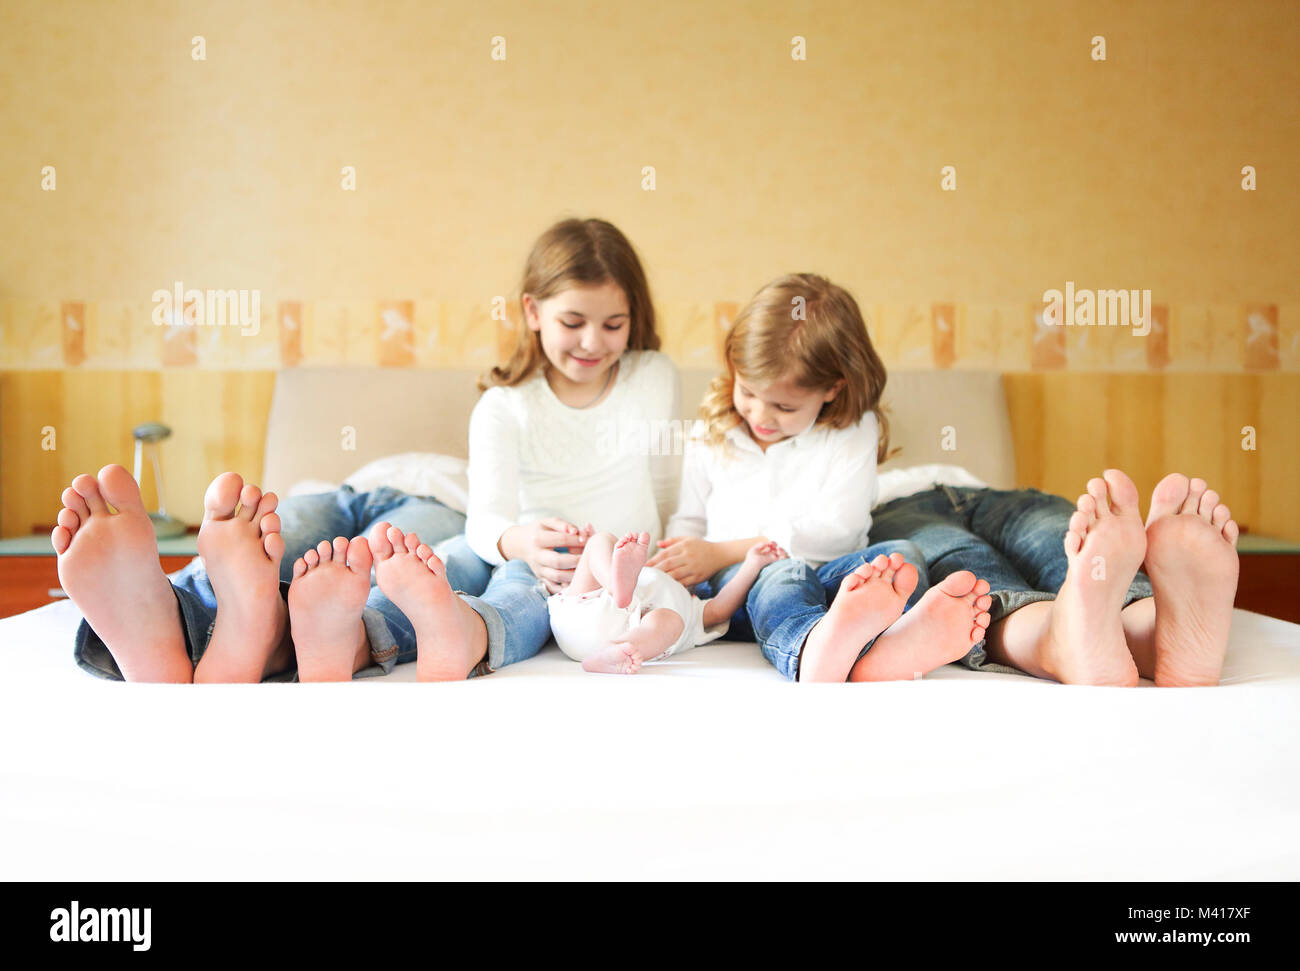 Sweet family in bed. Father, mother and three little children, close up on feet Stock Photo